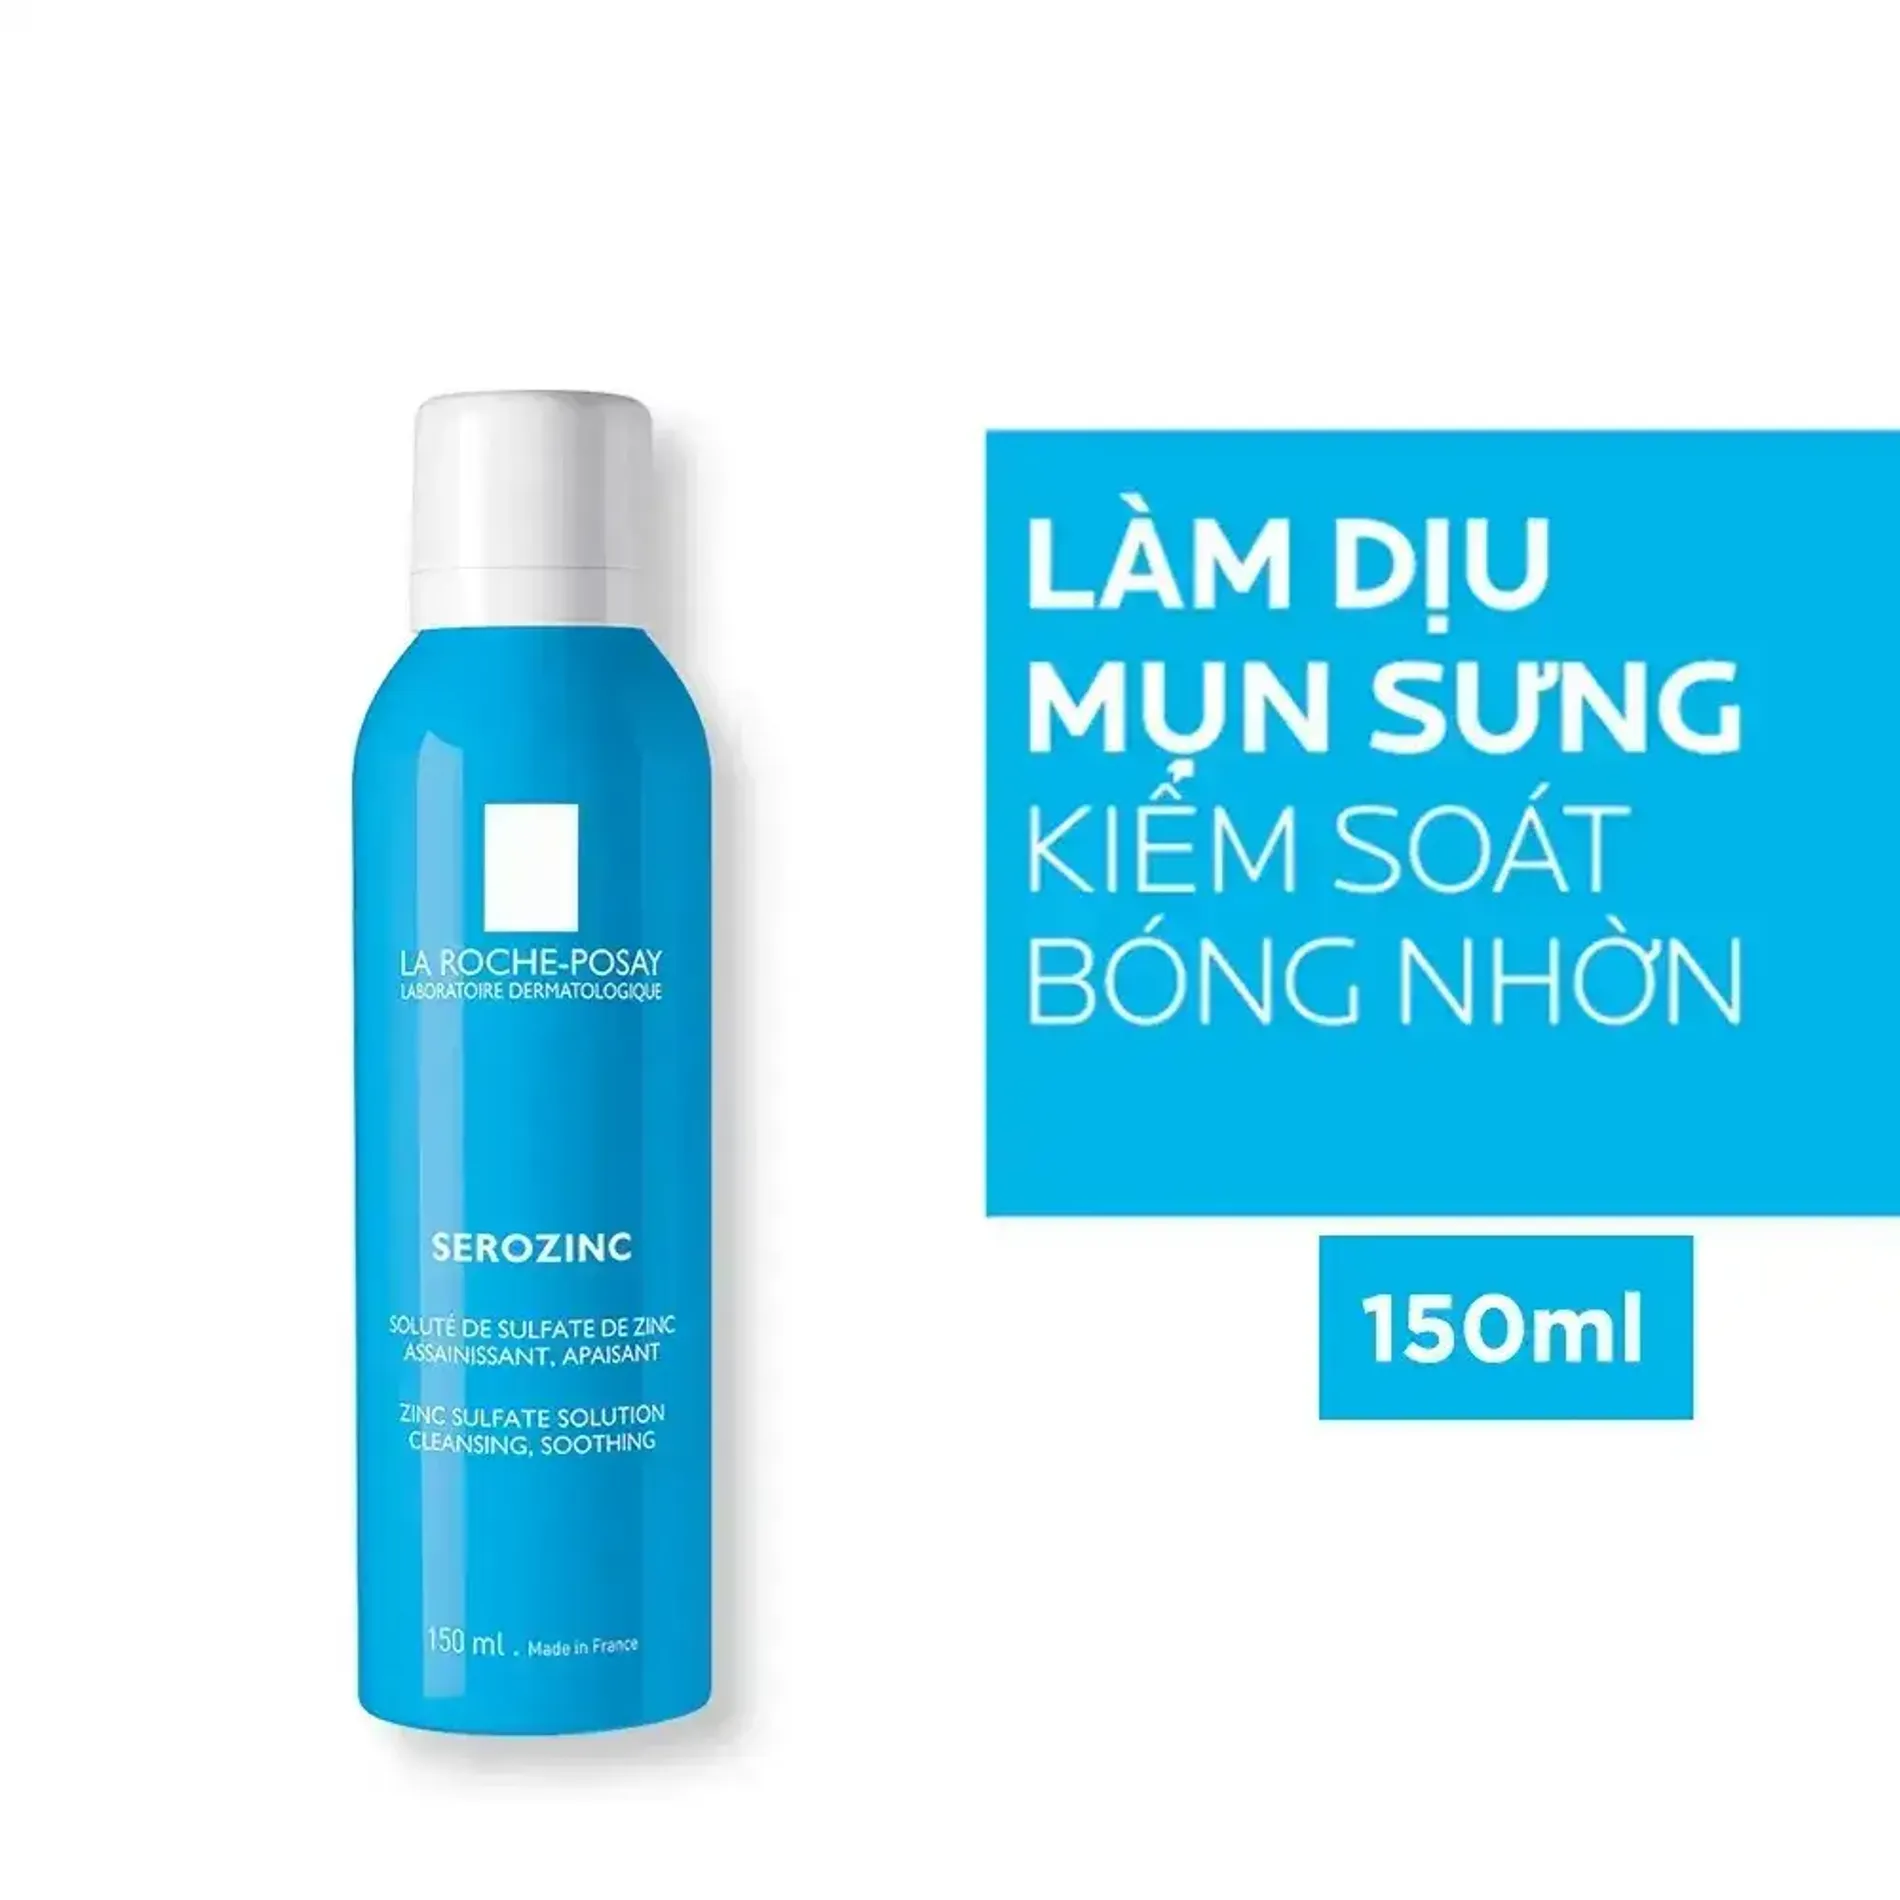 nuoc-xit-khoang-la-roche-posay-serozinc-zinc-sulfate-solution-cleansing-soothing-6